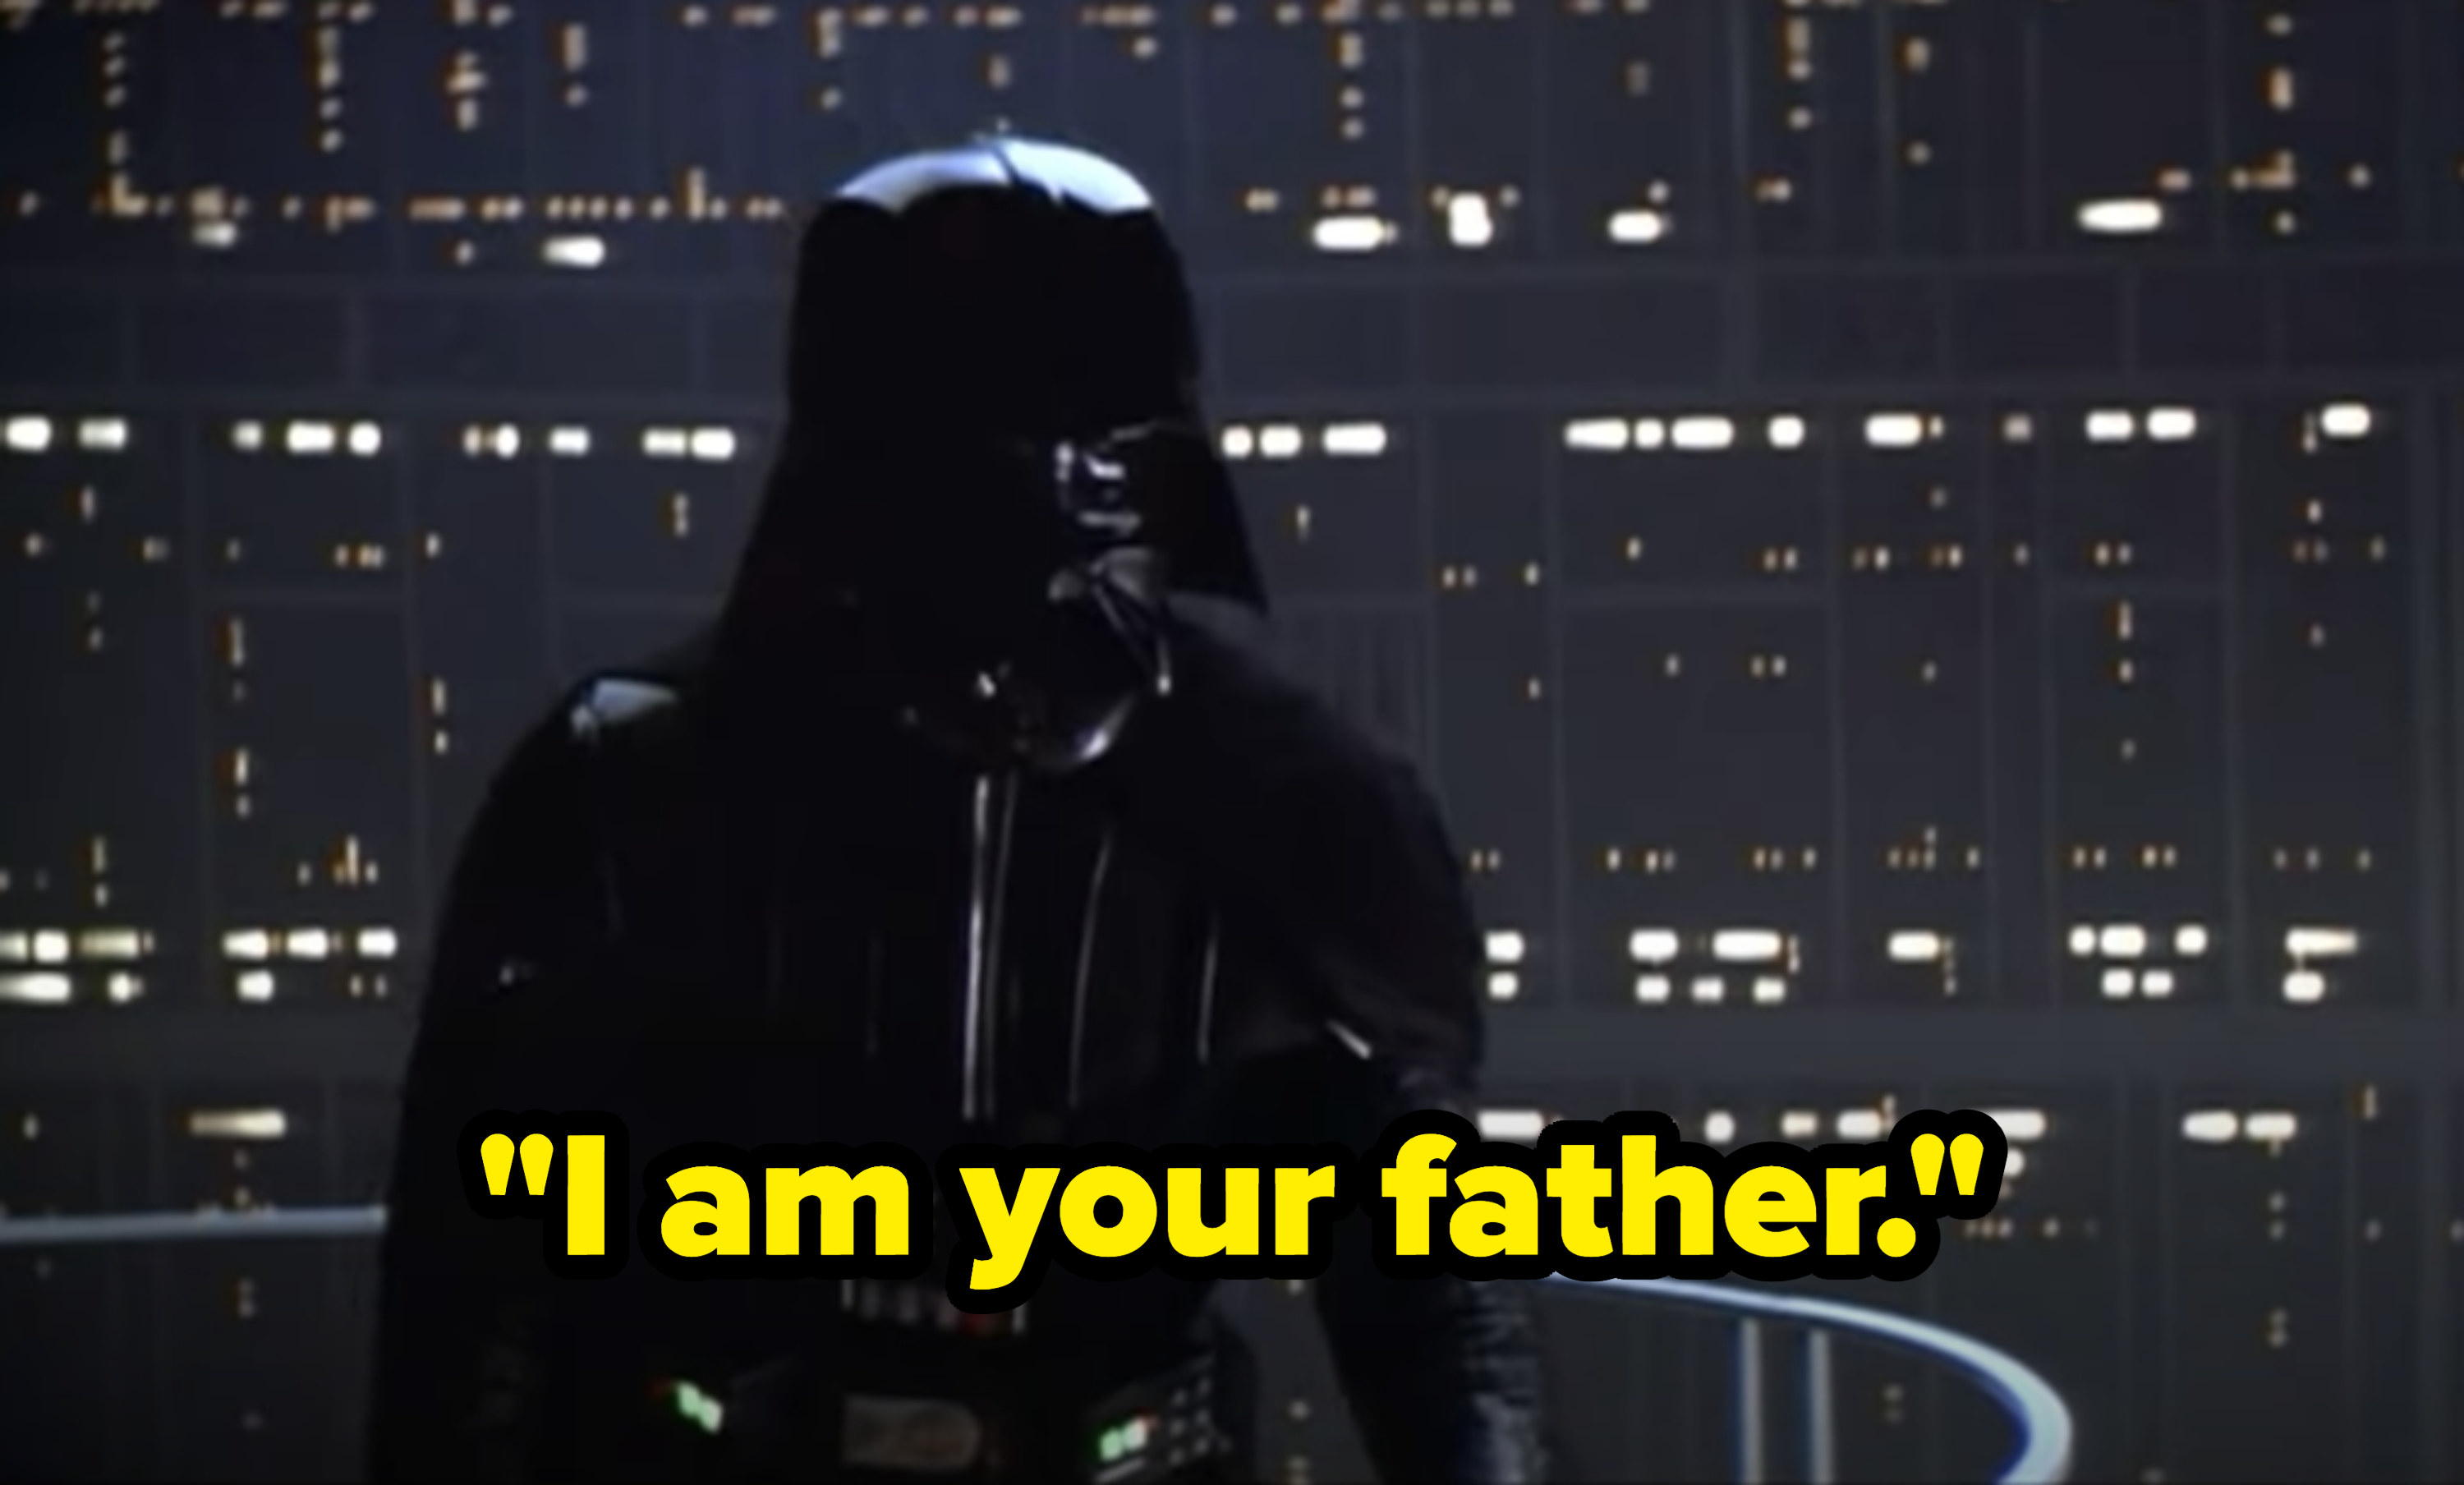 Darth Vader says &quot;I am your father.&quot;